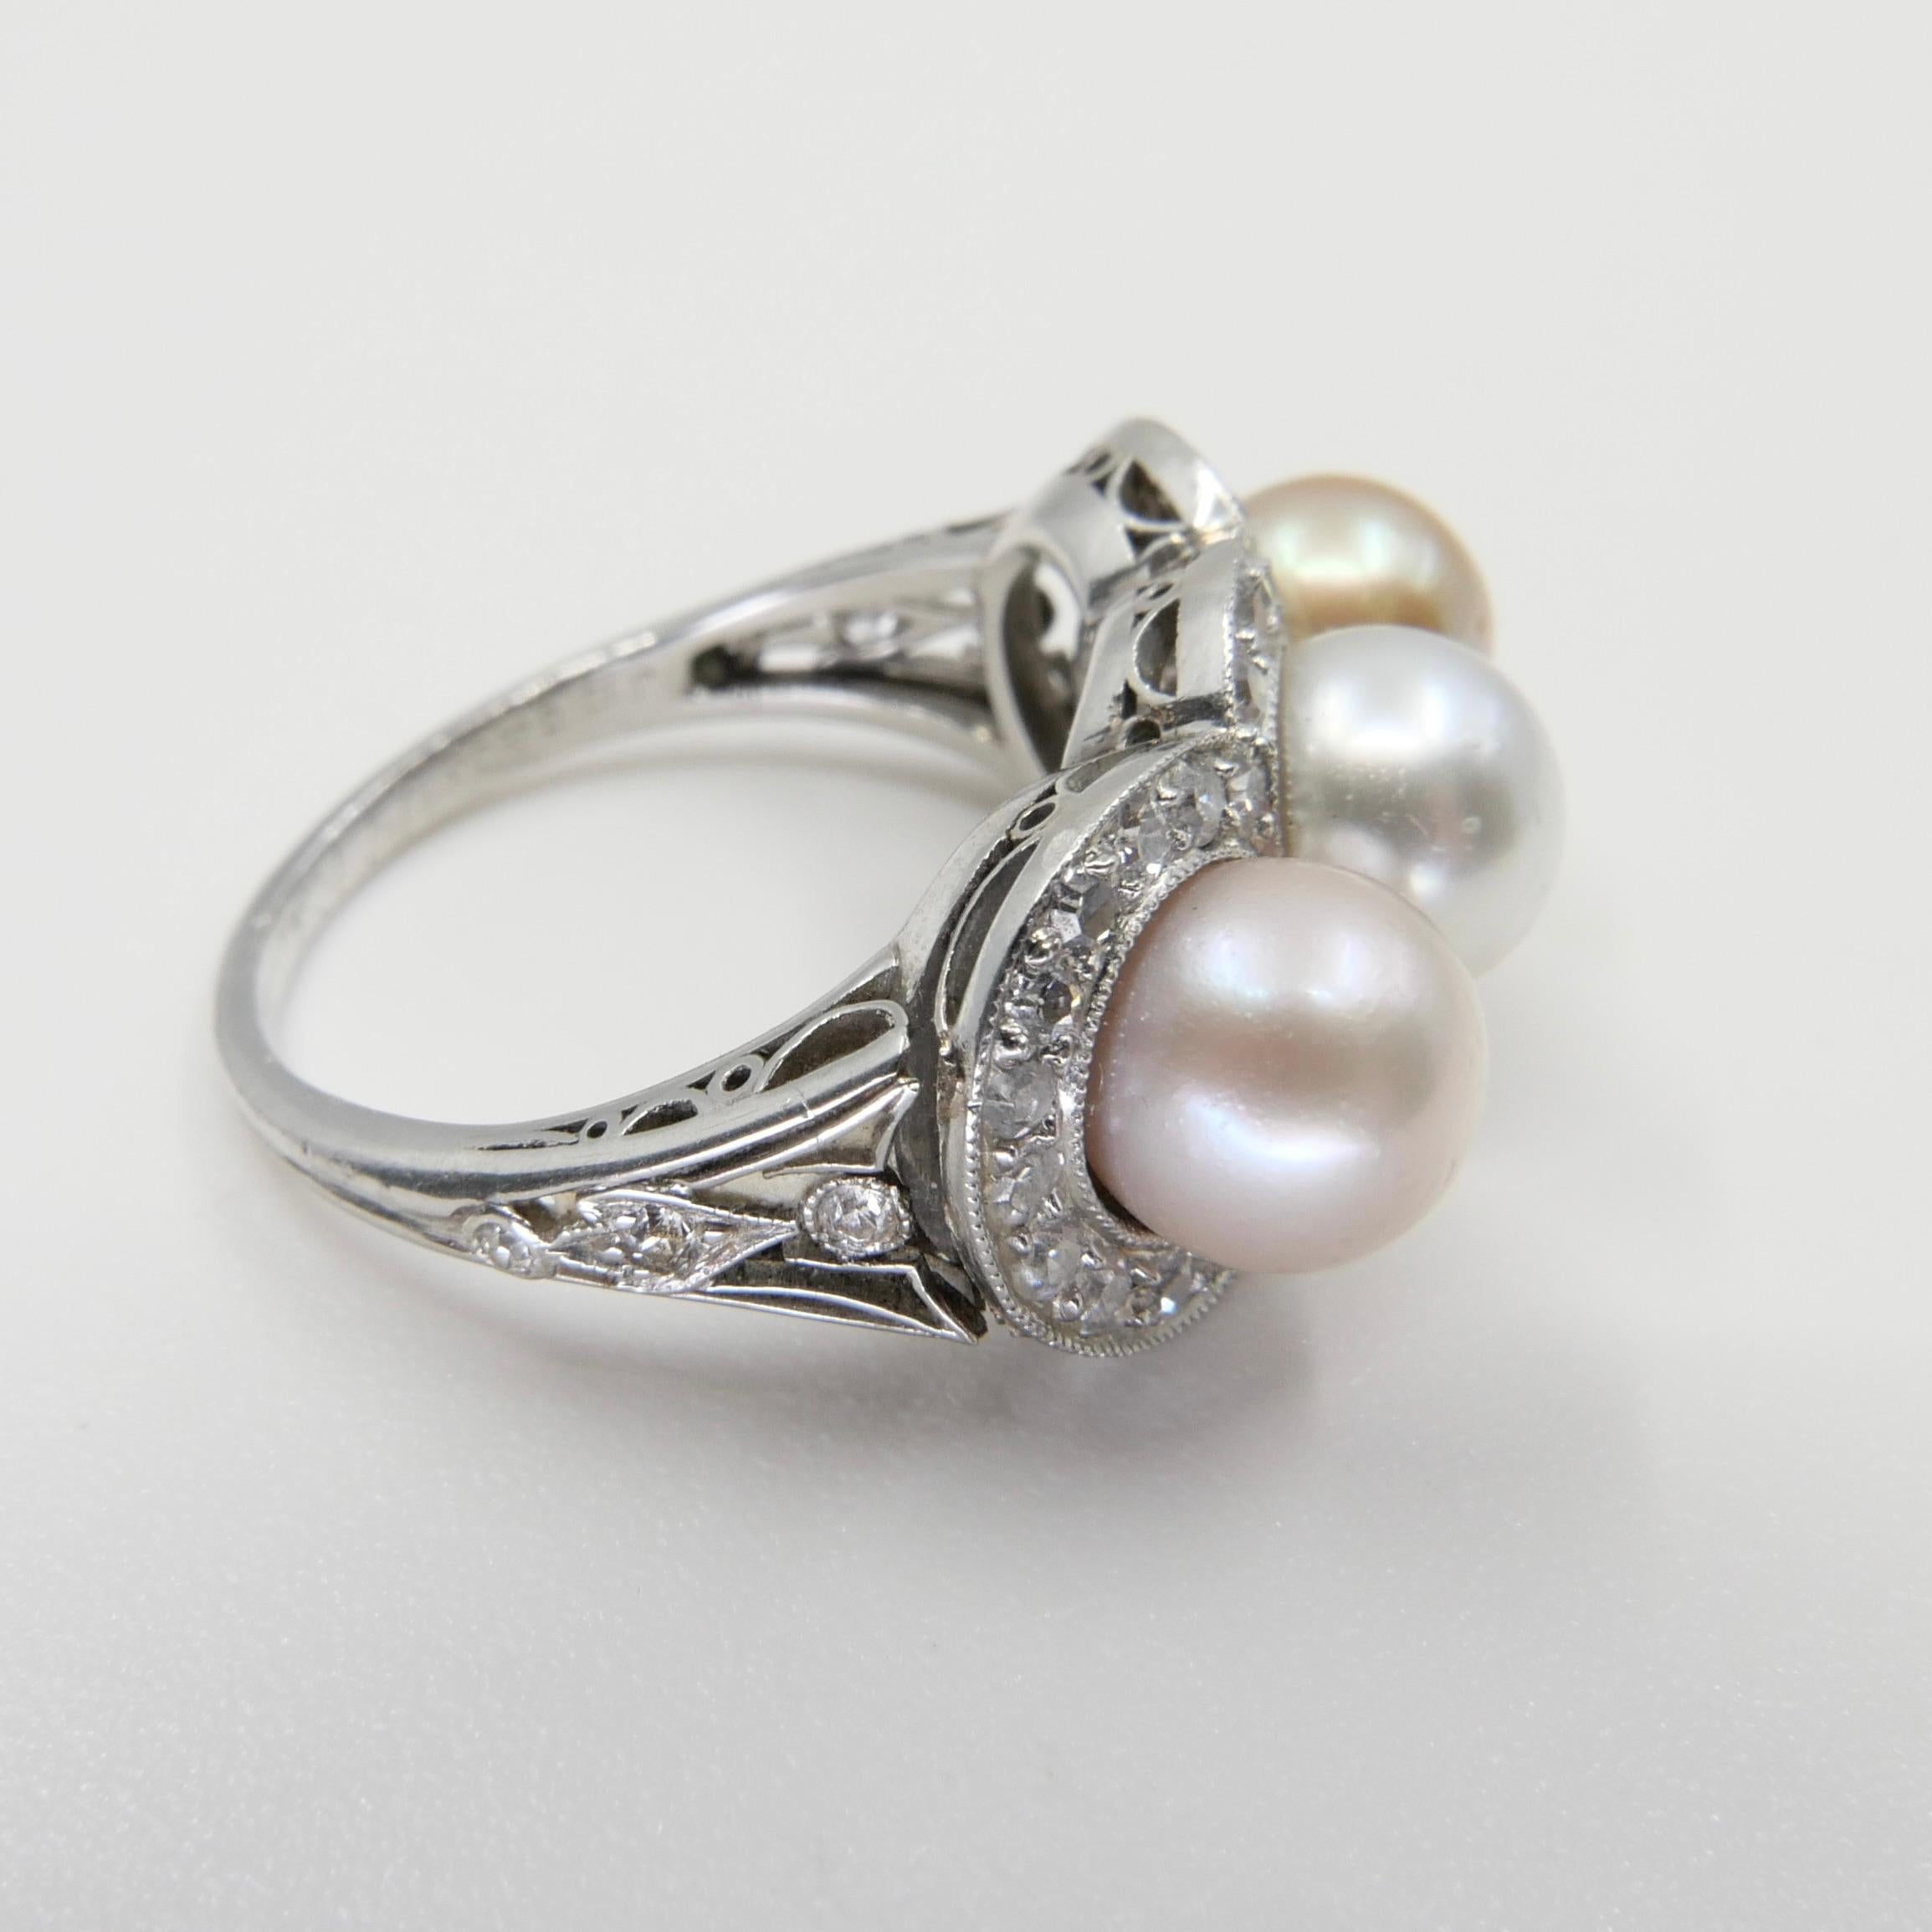 J E Caldwell Belle Epoque Certified 3 Natural Colored Pearls and Diamond Ring 6